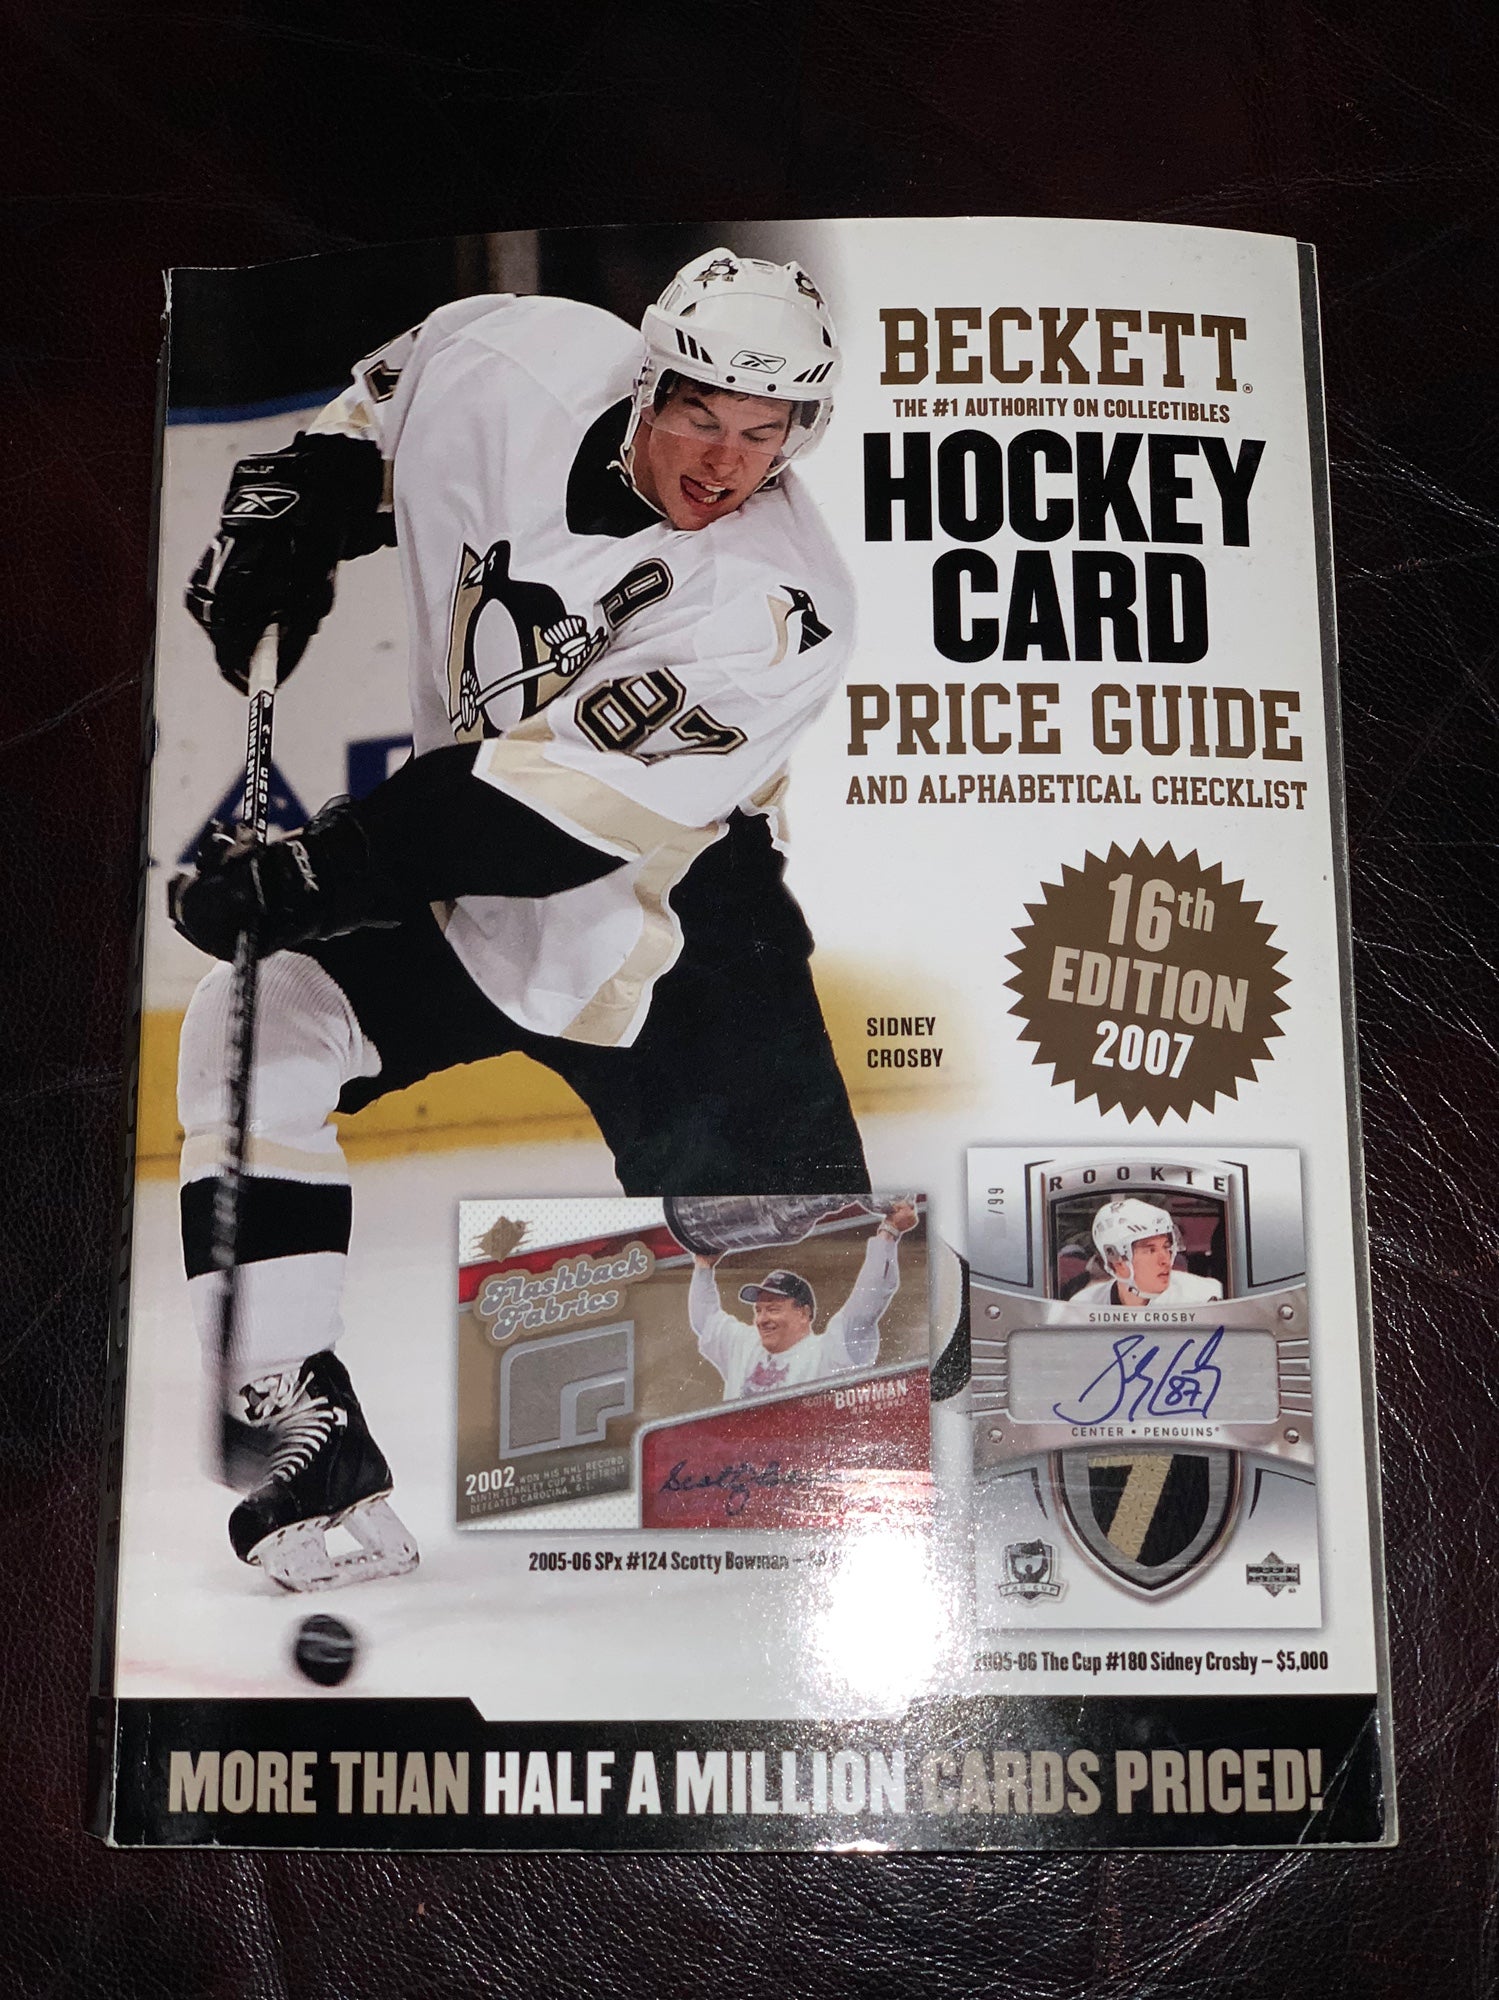 Hottest Sidney Crosby Cards on